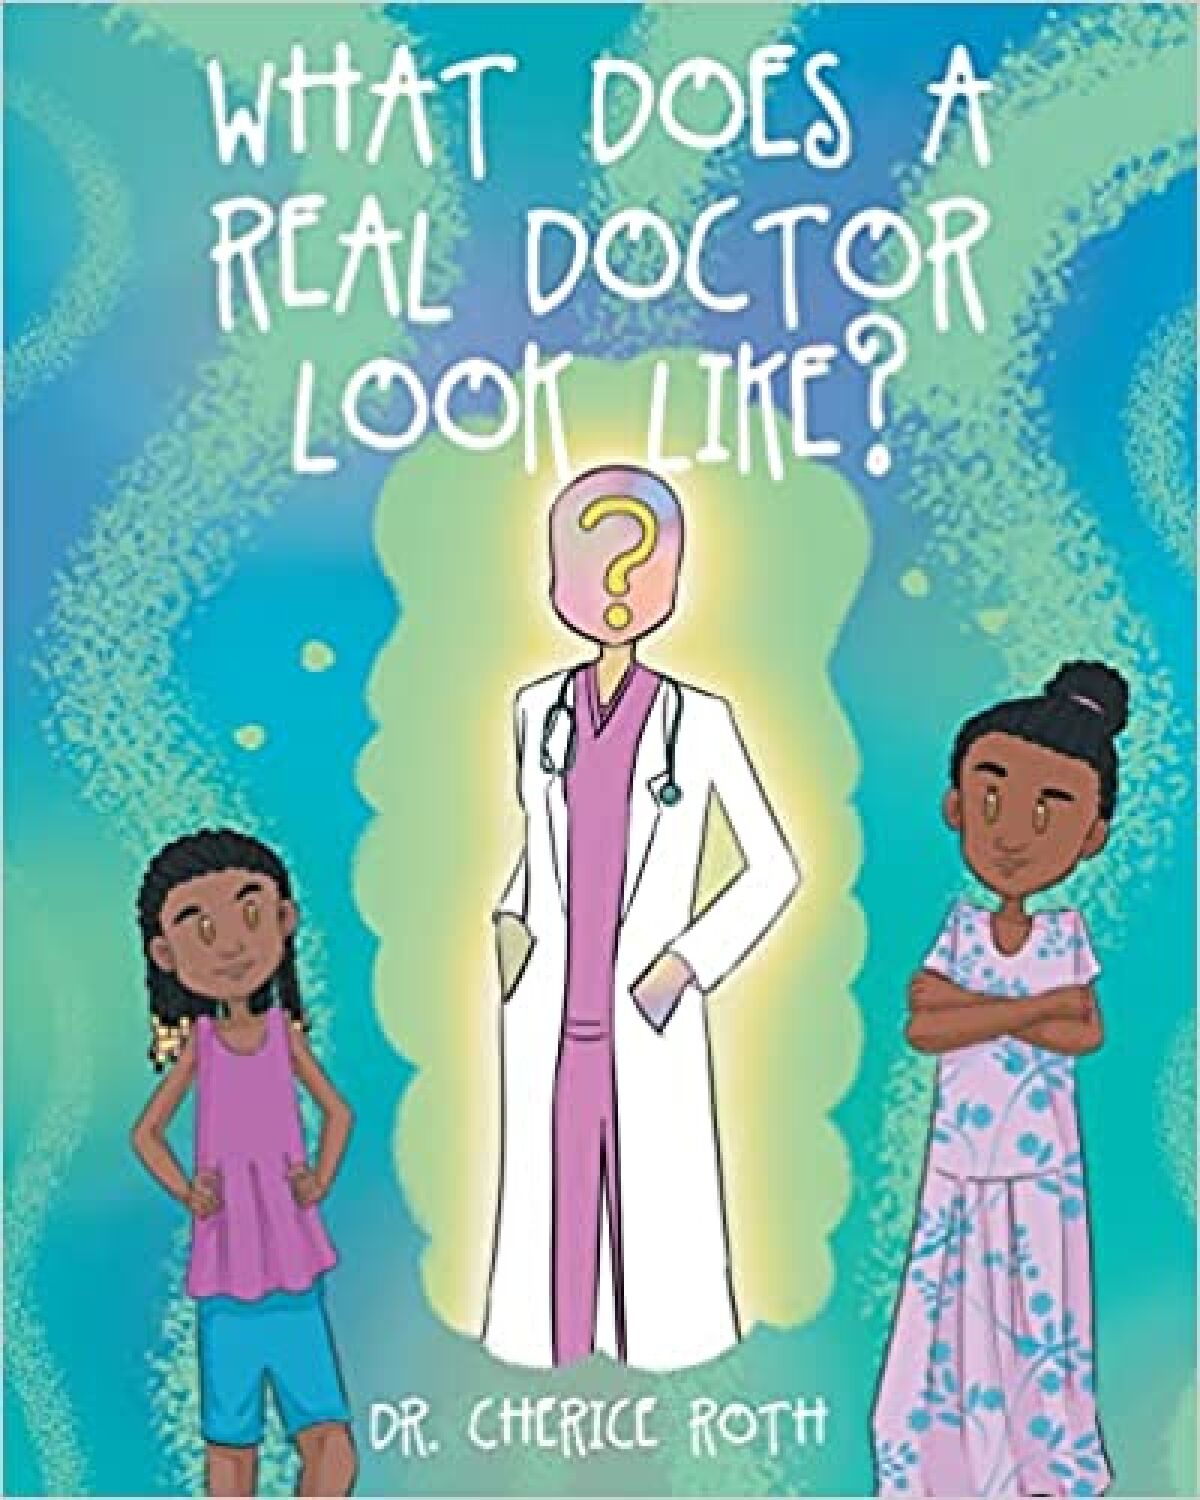 “What Does A Real Doctor Look Like?” cover